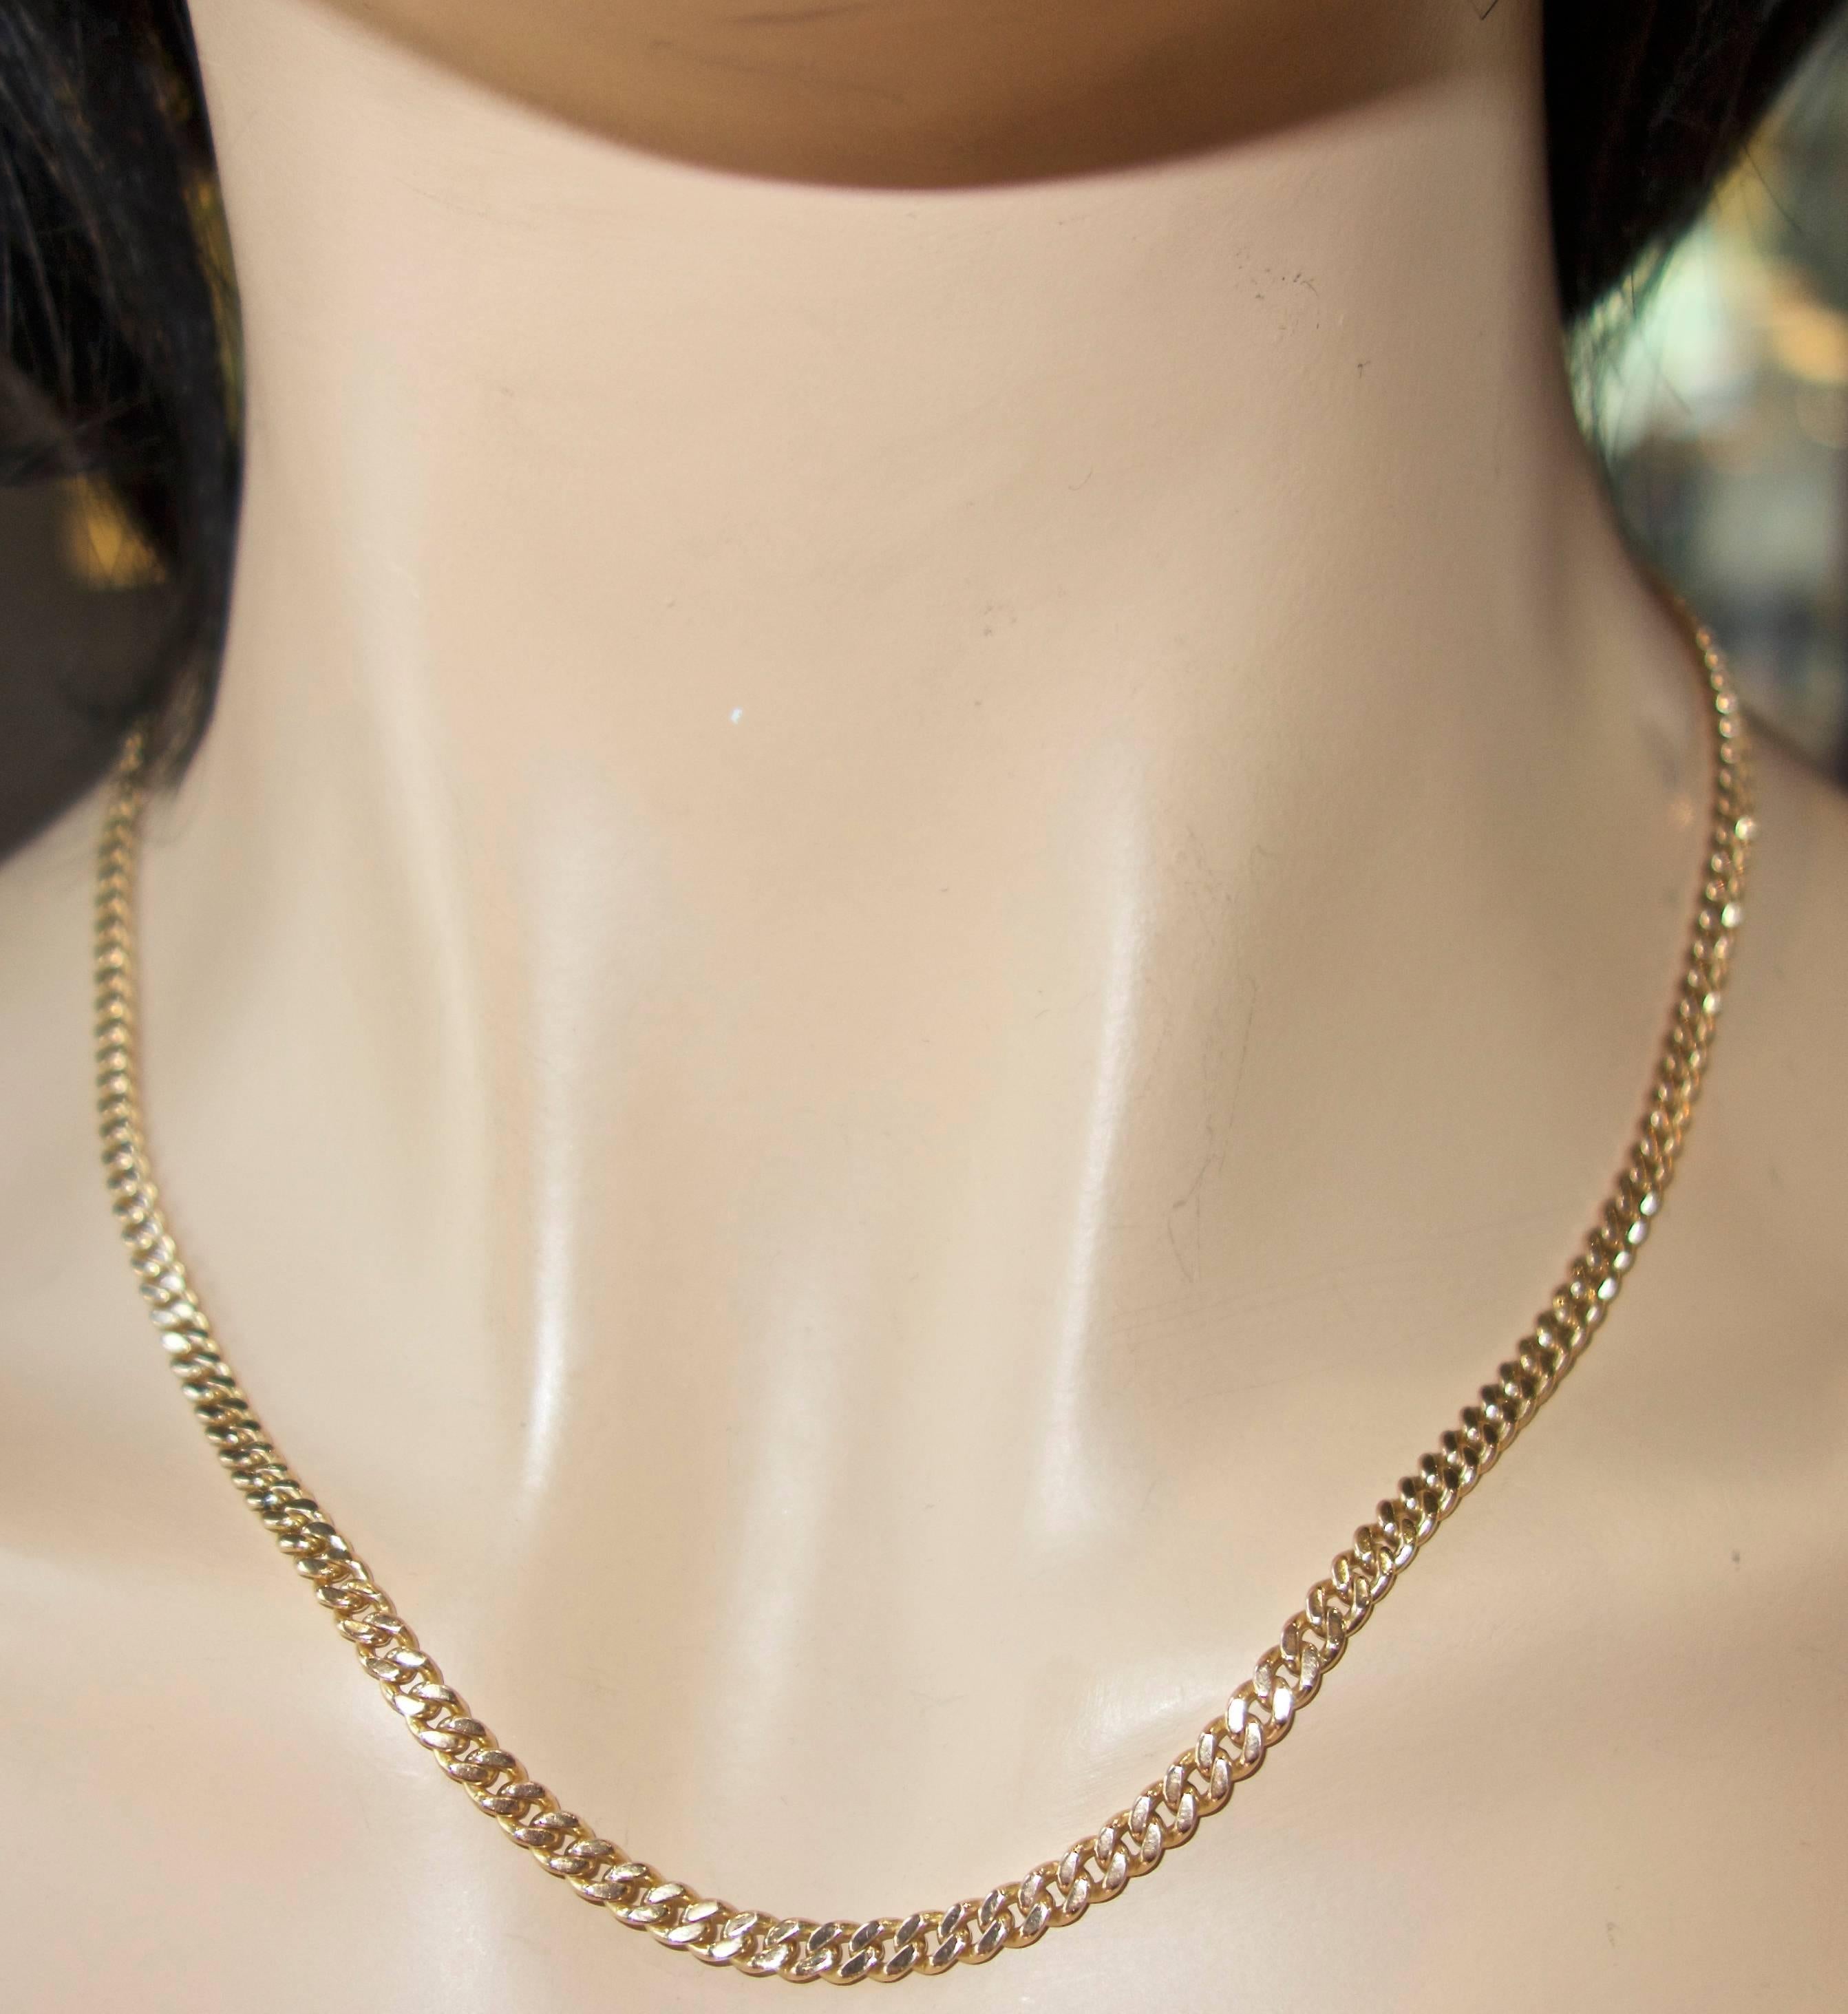 14K and 19 Inches long, this gold chain weighs 24.34 grams a sturdy clasp completes the design.